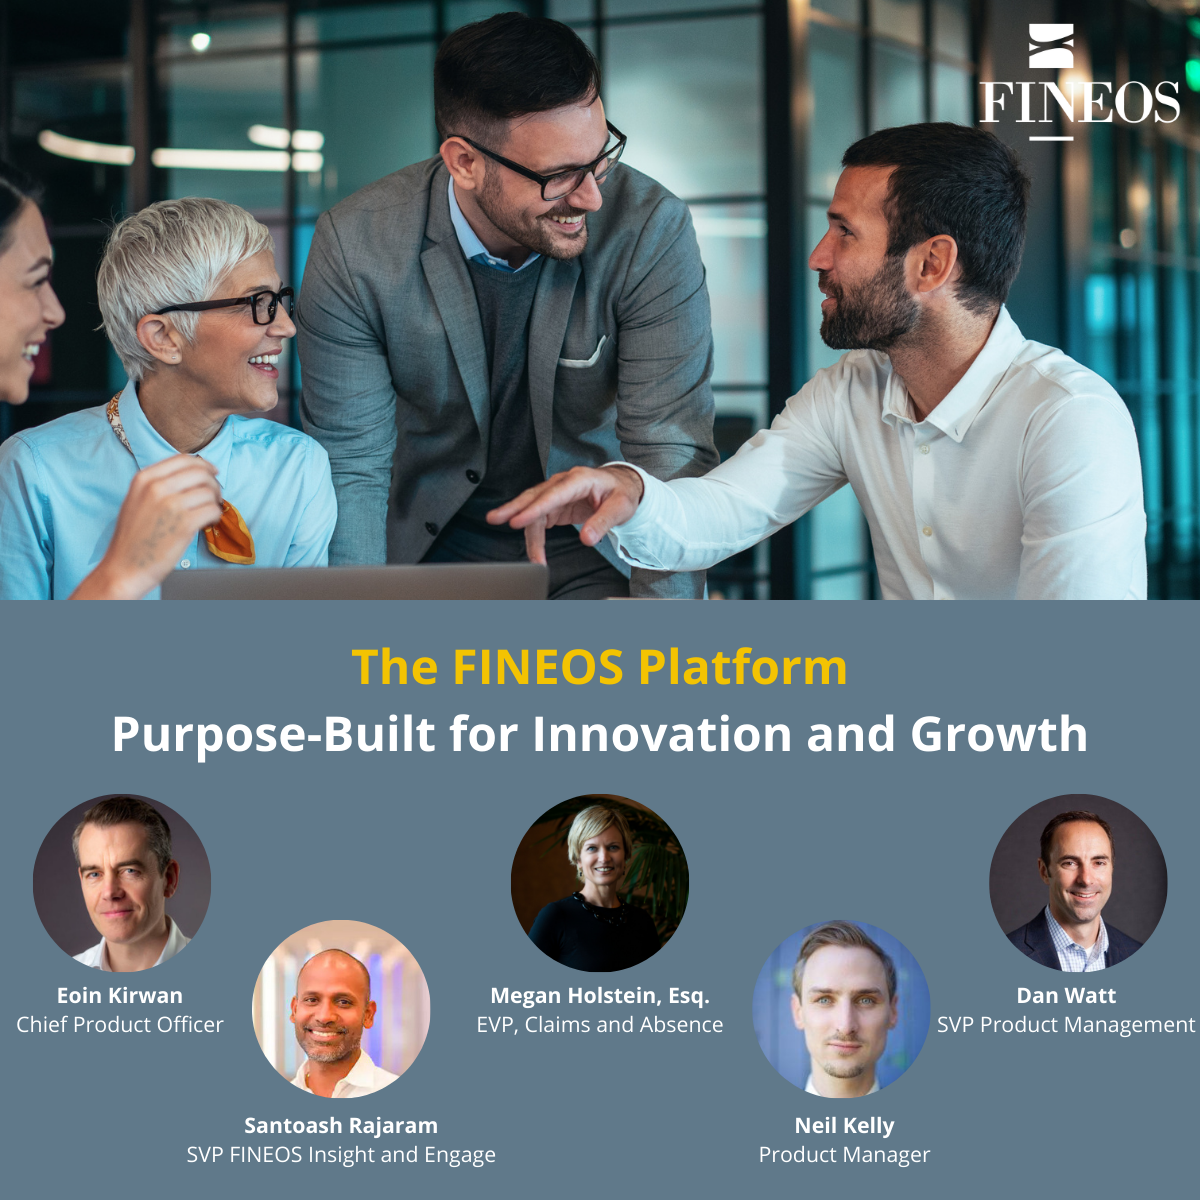 The FINEOS Platform: Purpose-Built for Innovation and Growth